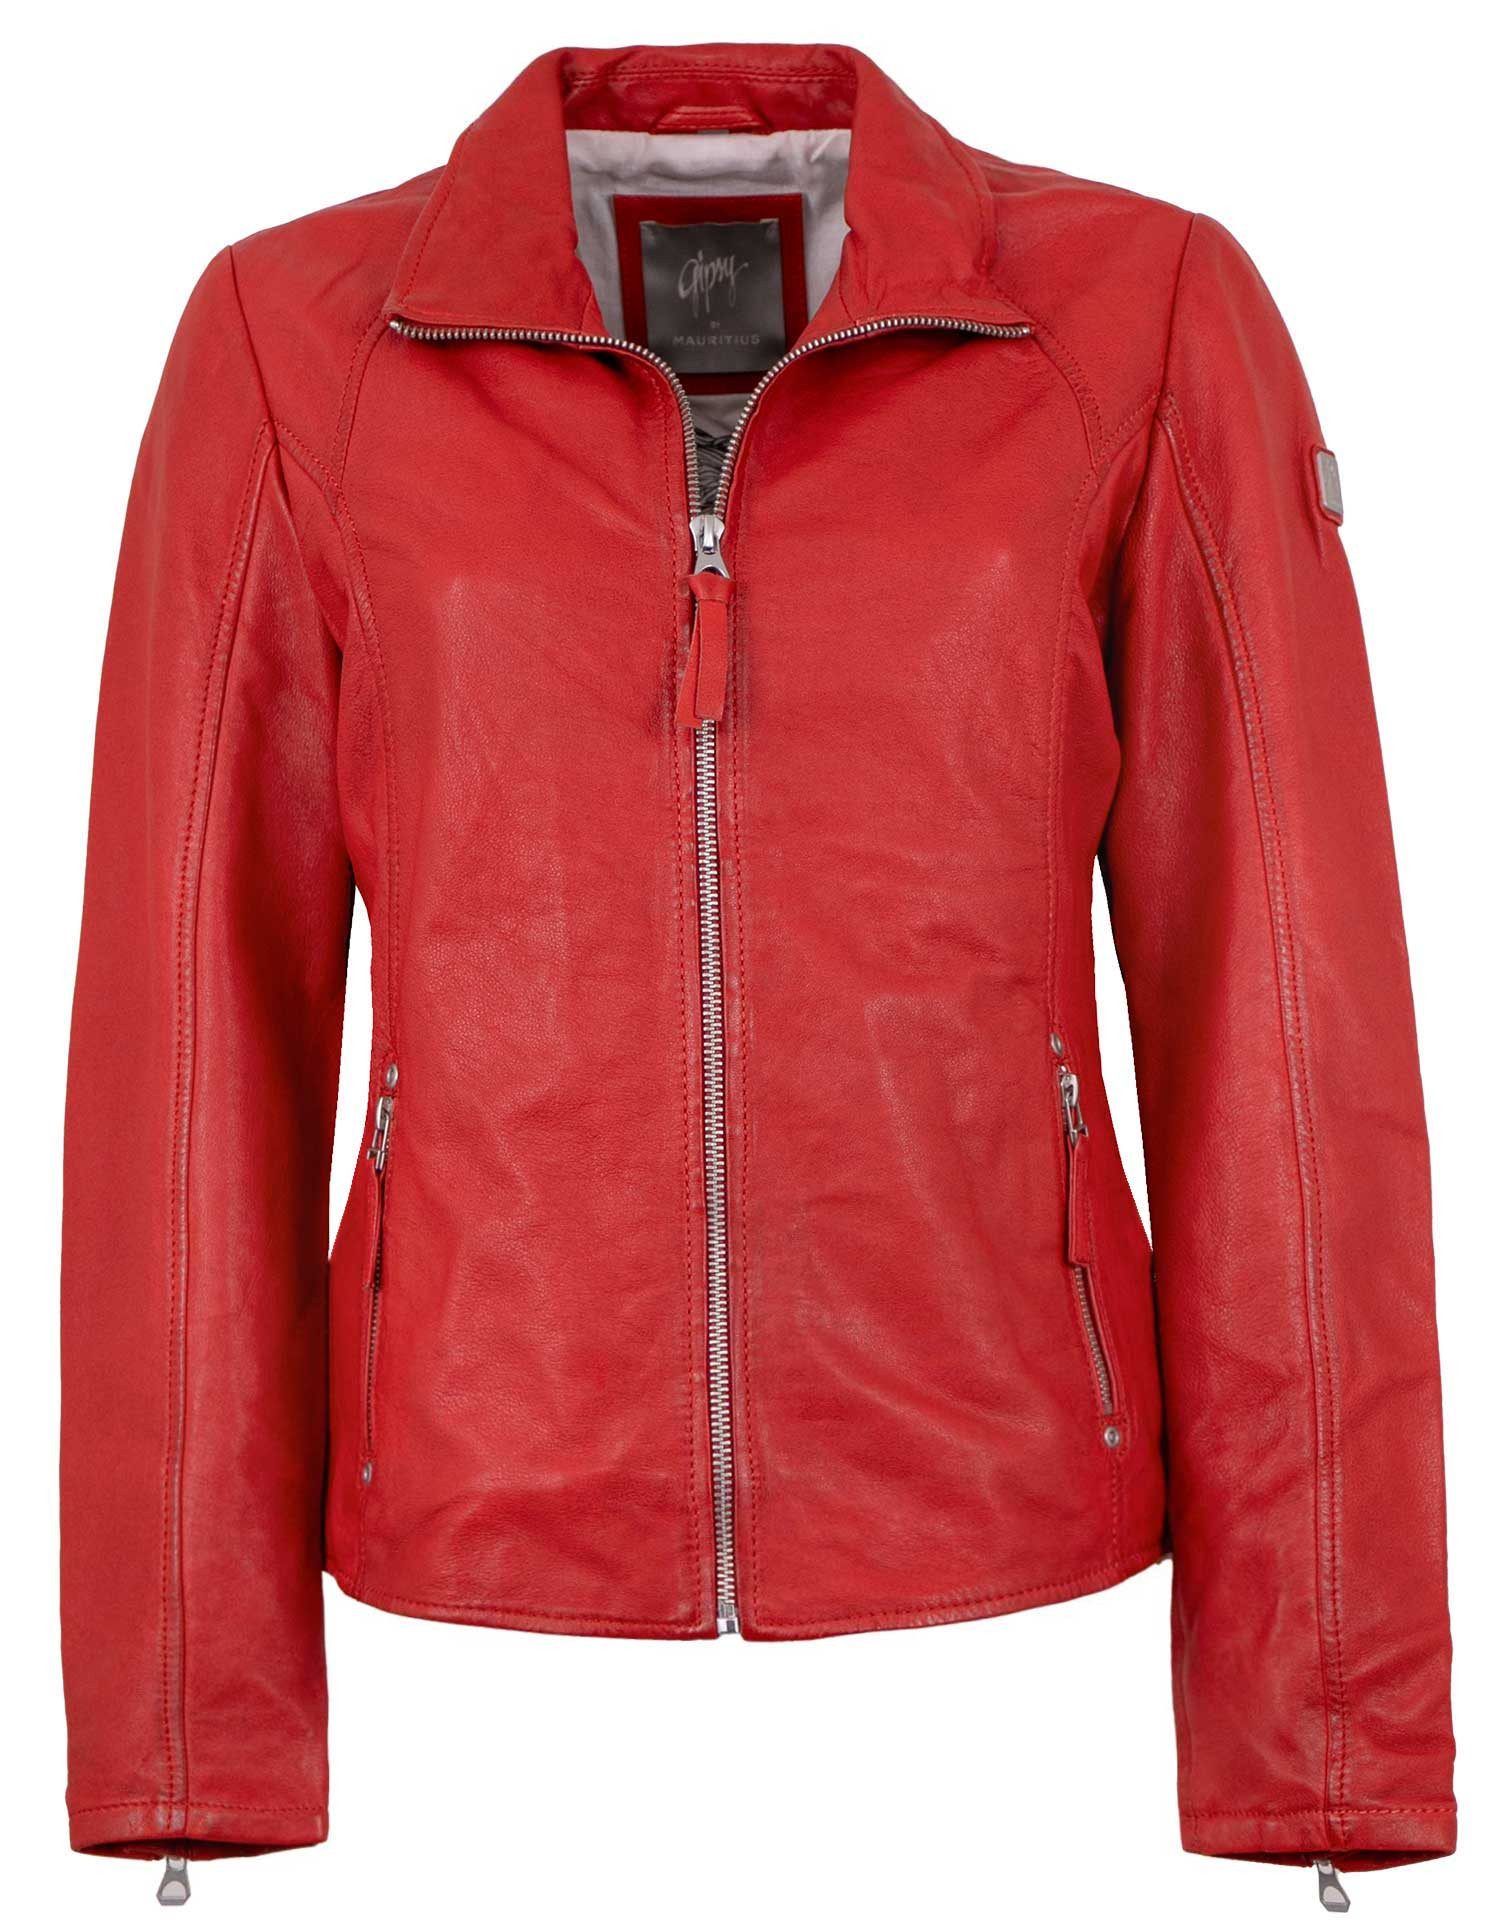 Gipsy by Mauritius Lederjacke GWEleen Gipsy by Mauritius - Damen Echtleder Lederjacke Lammnappa rot